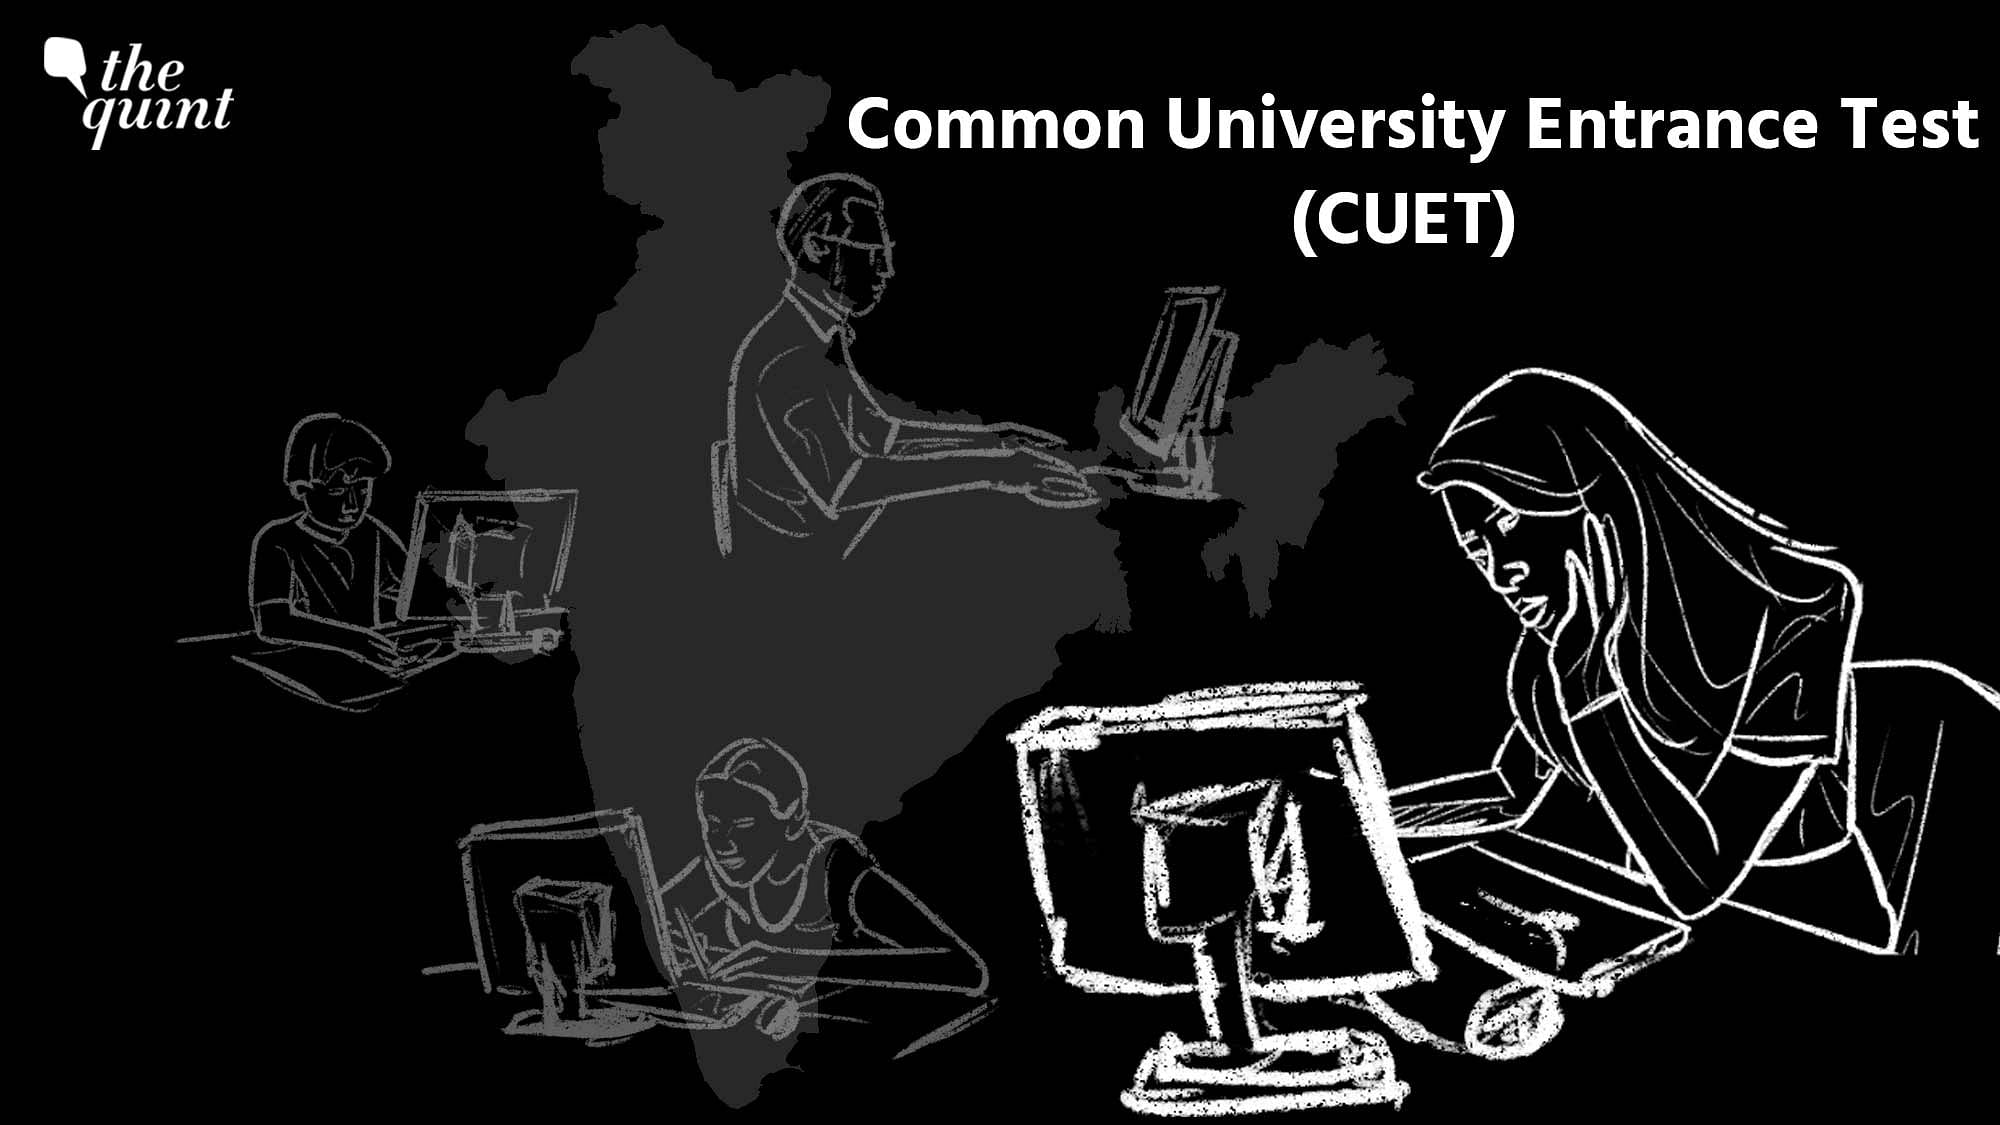 <div class="paragraphs"><p>As many as 86 universities are participating in CUET-UG this year. This includes 43 central universities, 12 deemed universities, and 18 private universities across the country.</p></div>